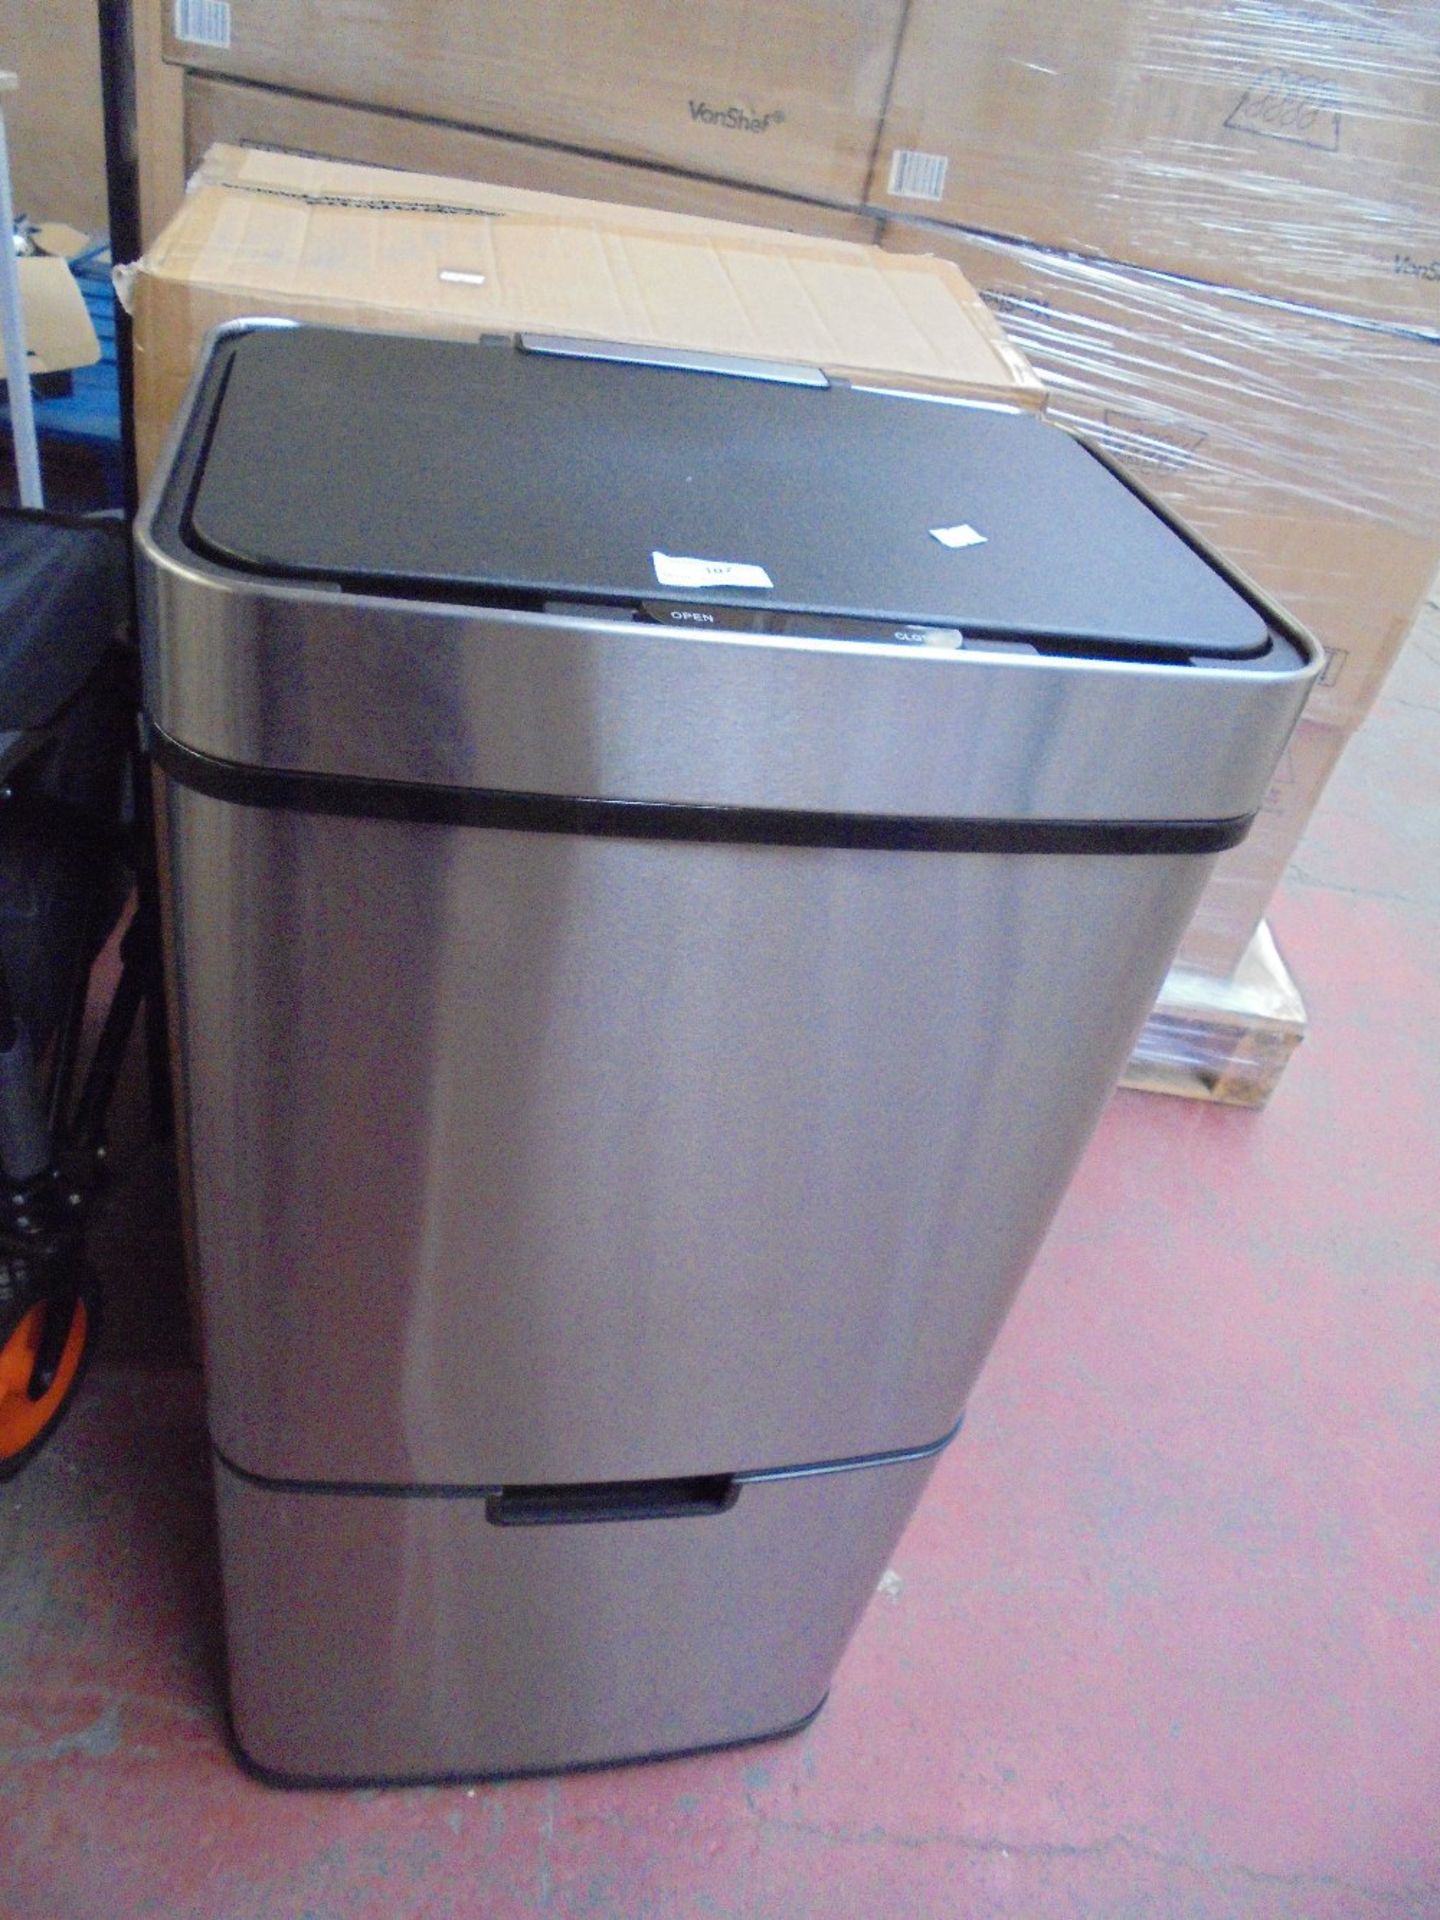 72ltr Recycling Sensor Bin new & boxed  Please note by Bidding on this item you agree to the